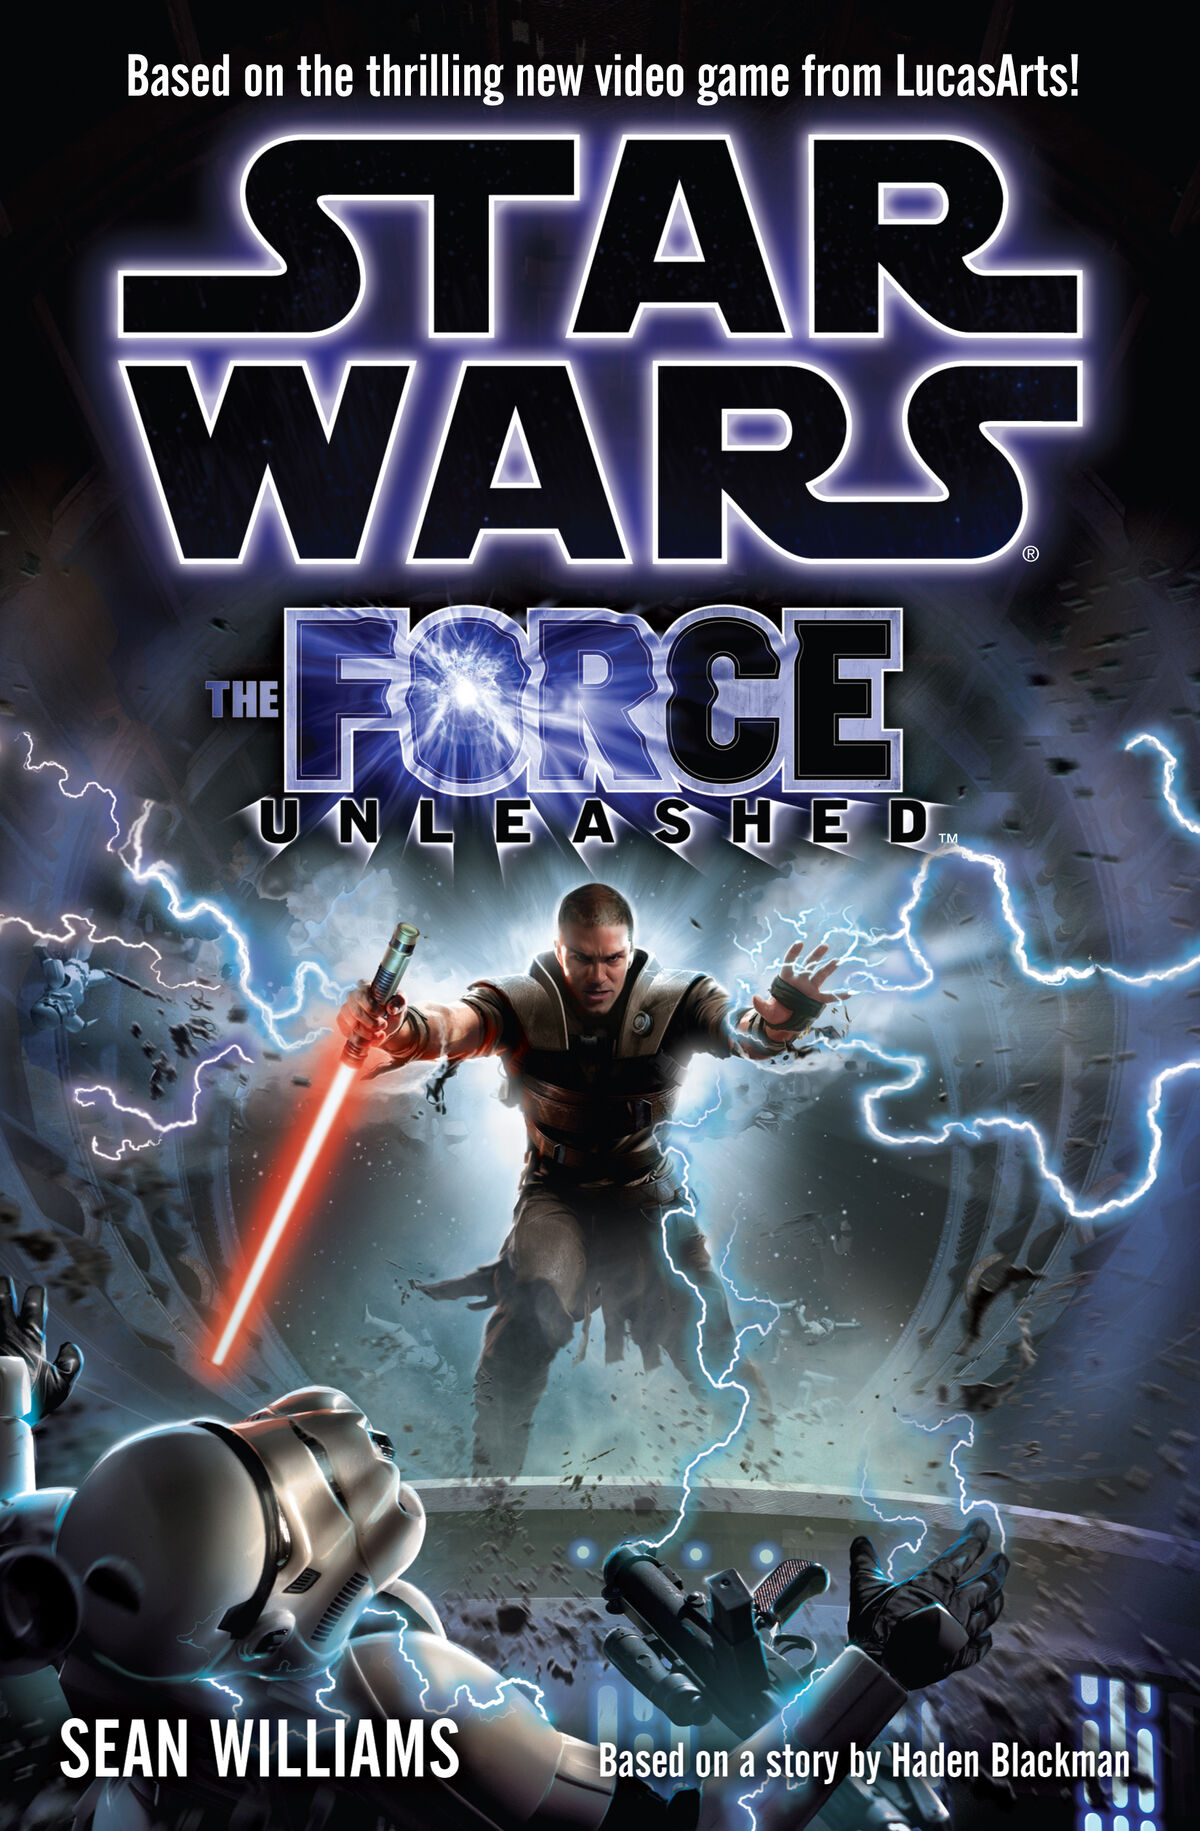 Star Wars The Force Unleashed (Official Prima Guide) PDF